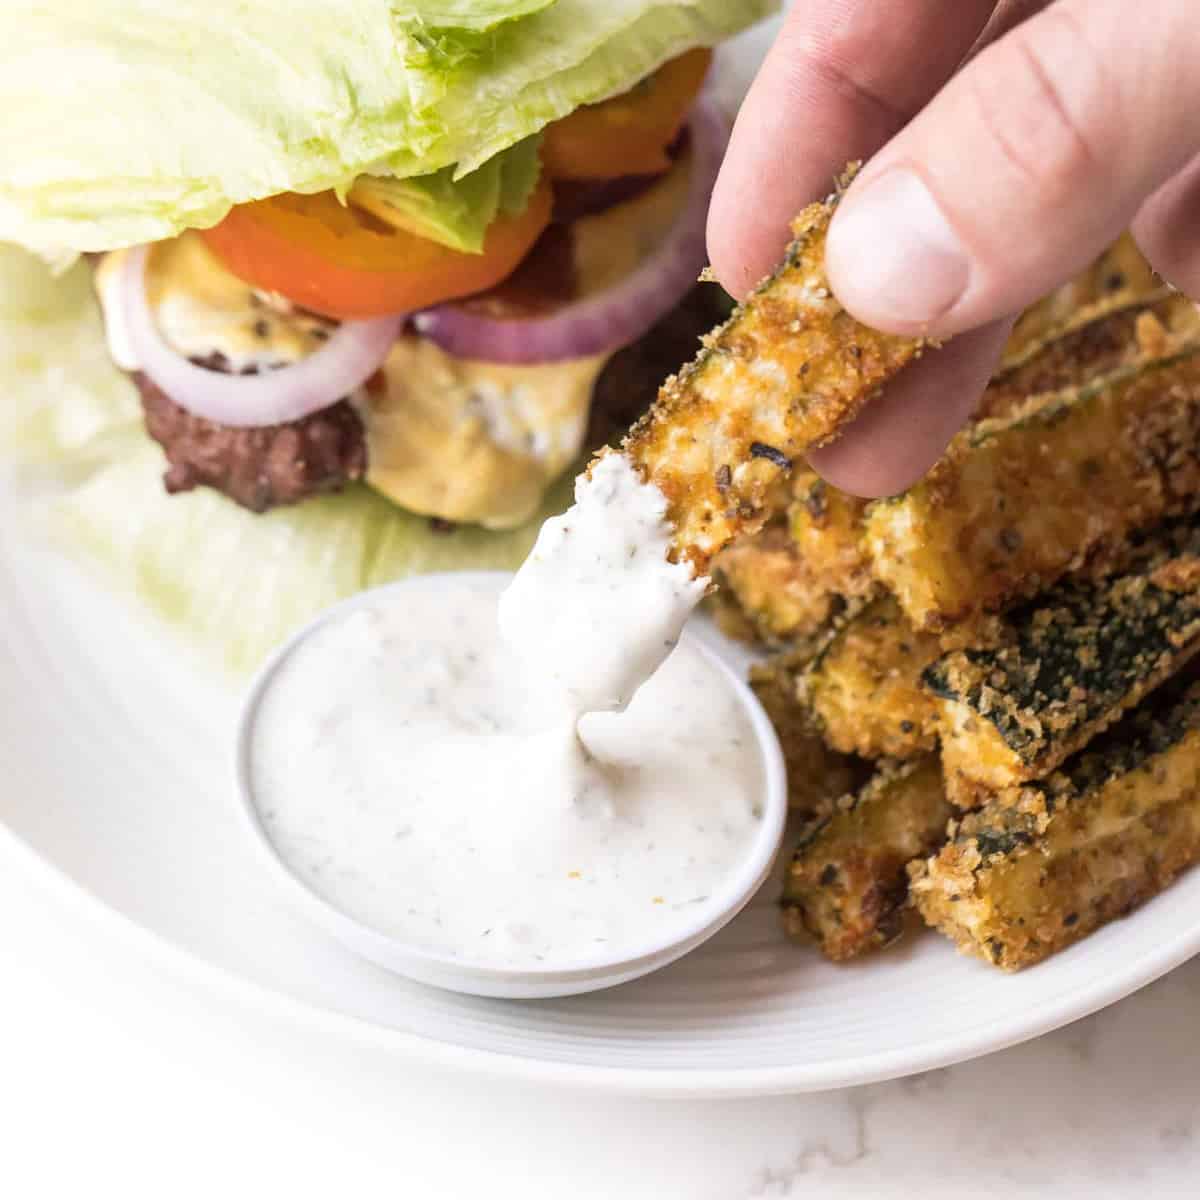 Hand dipping keto zucchini fries in ranch dressing on a white plate and white background with a lettuce wrapped burger on the plate